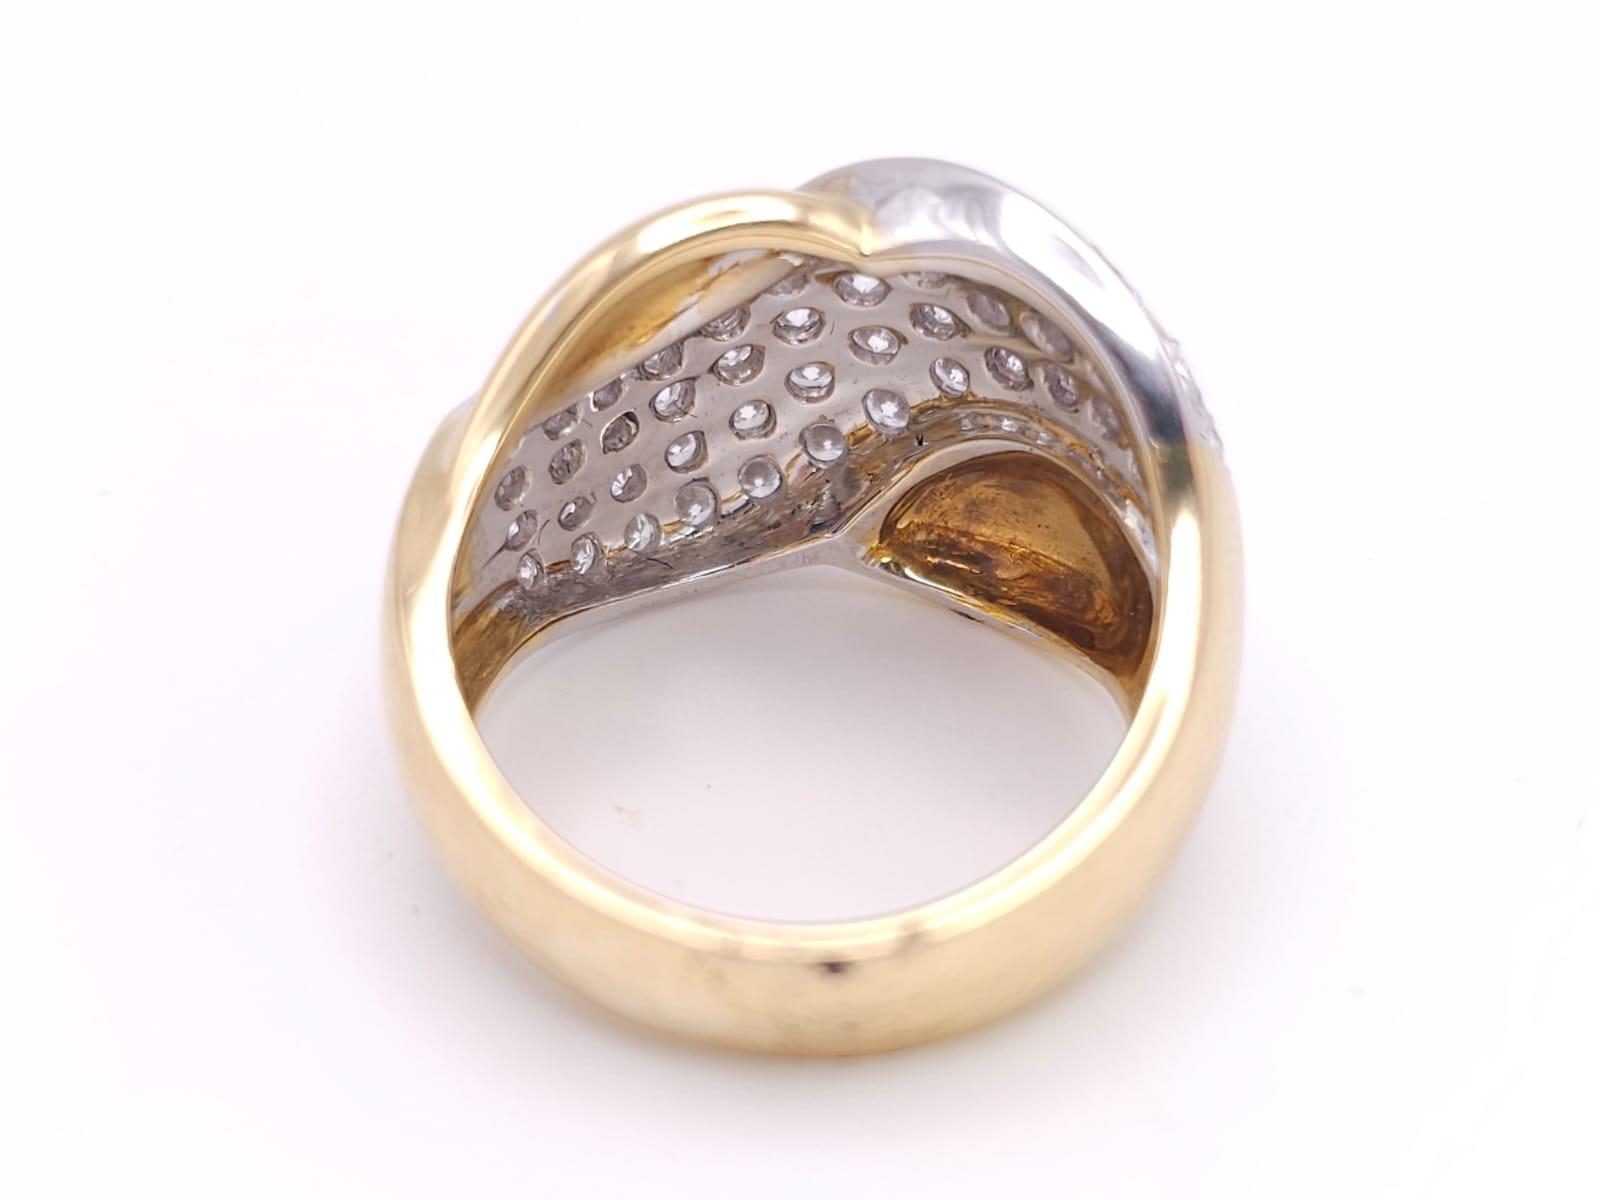 An 18K Yellow Gold Diamond Set Fancy Ring. 1.40ctw, Size N, 10.4g total weight. Ref: 2753 - Image 5 of 7